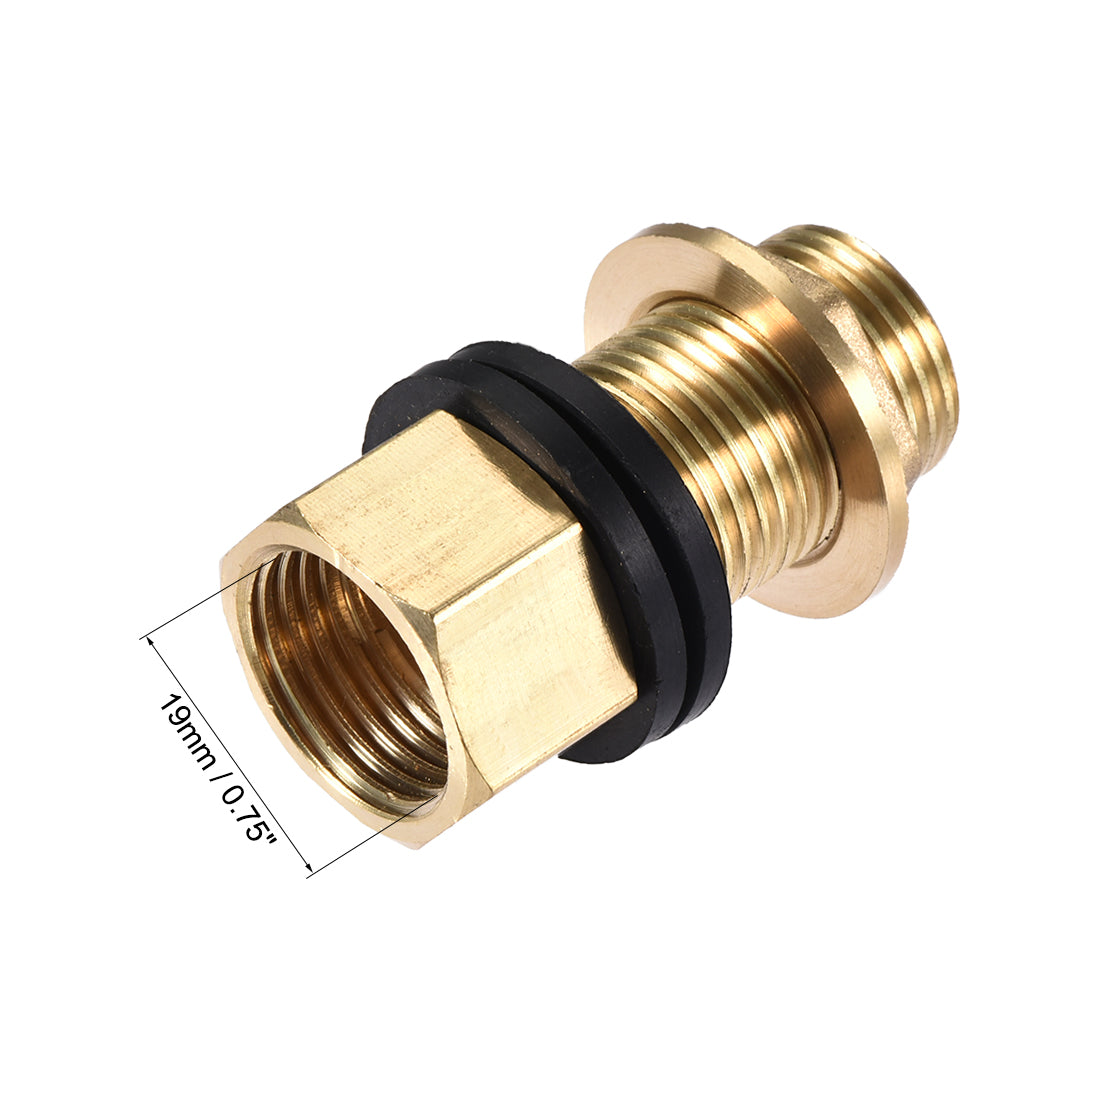 Uxcell Uxcell Bulkhead Fitting, G1/2 Male 0.75" Female, Hex Tube Adaptor Hose Fitting, with Silicone Gaskets, for Water Tanks, Brass, Gold Tone